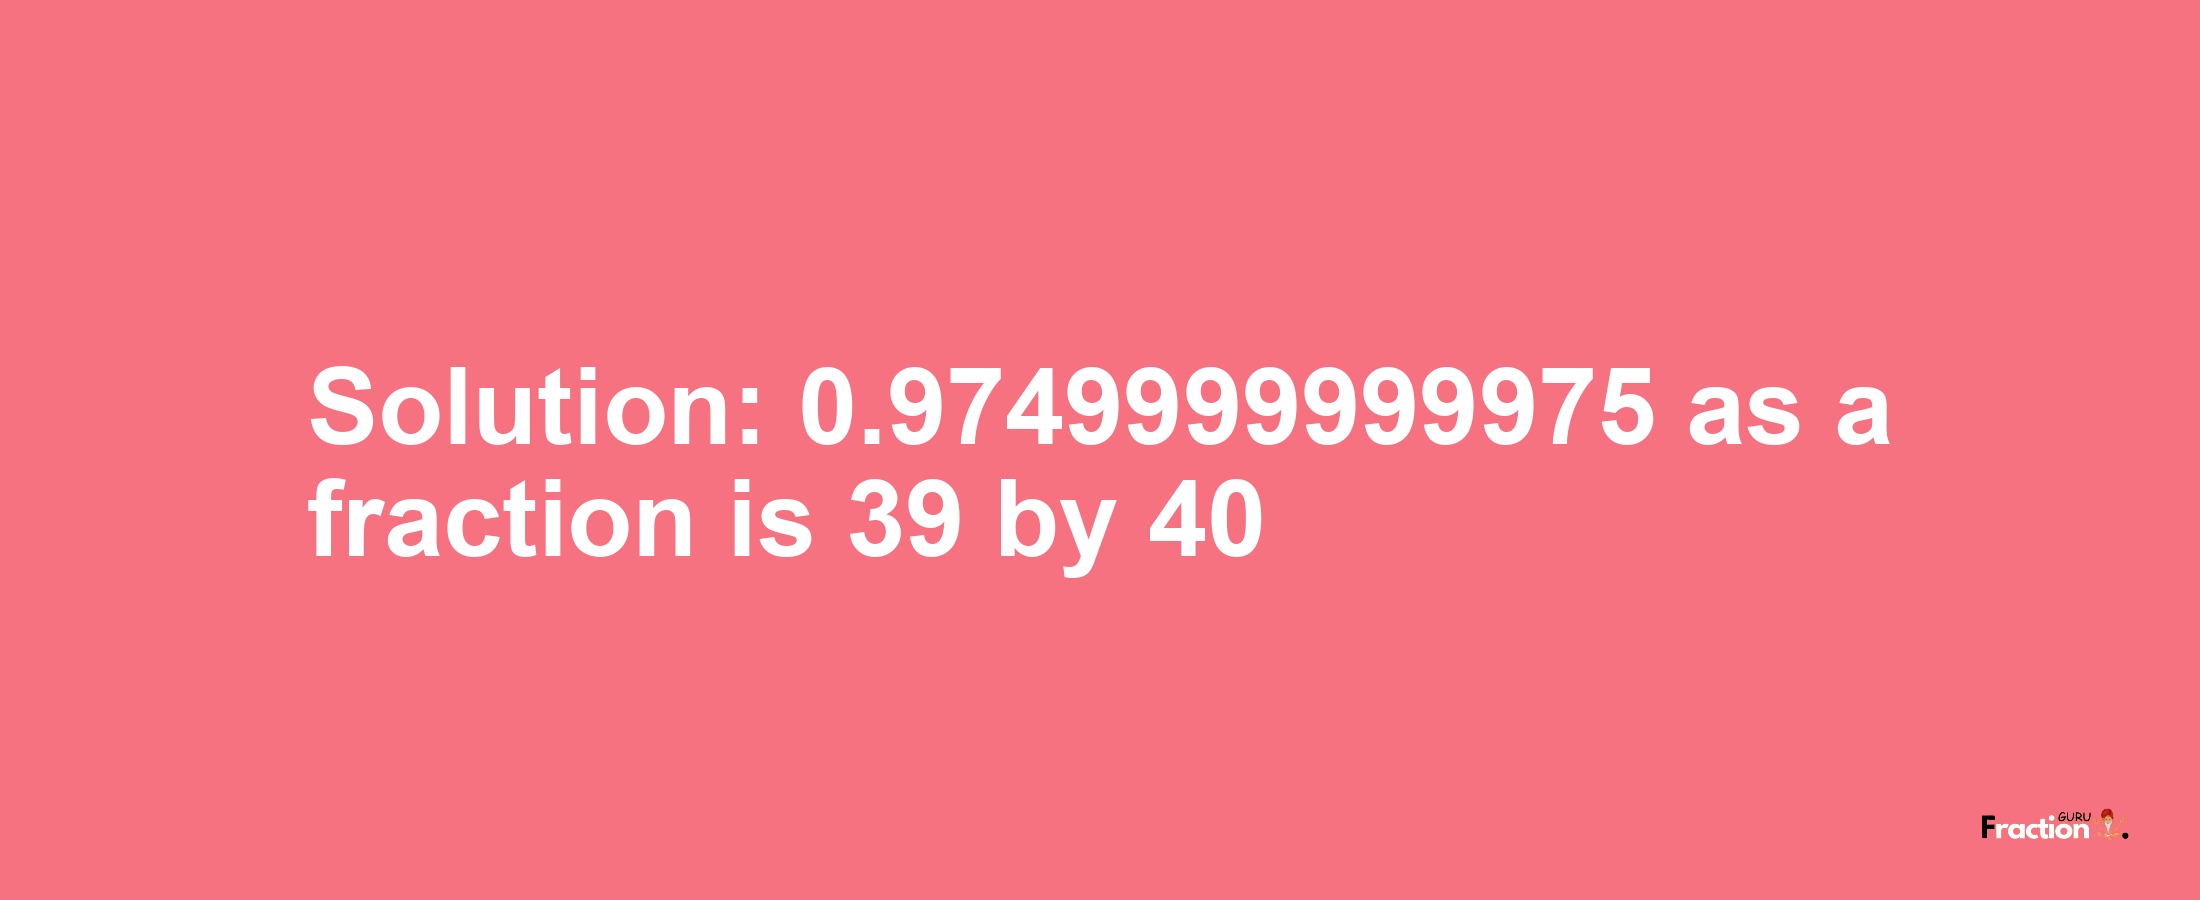 Solution:0.9749999999975 as a fraction is 39/40